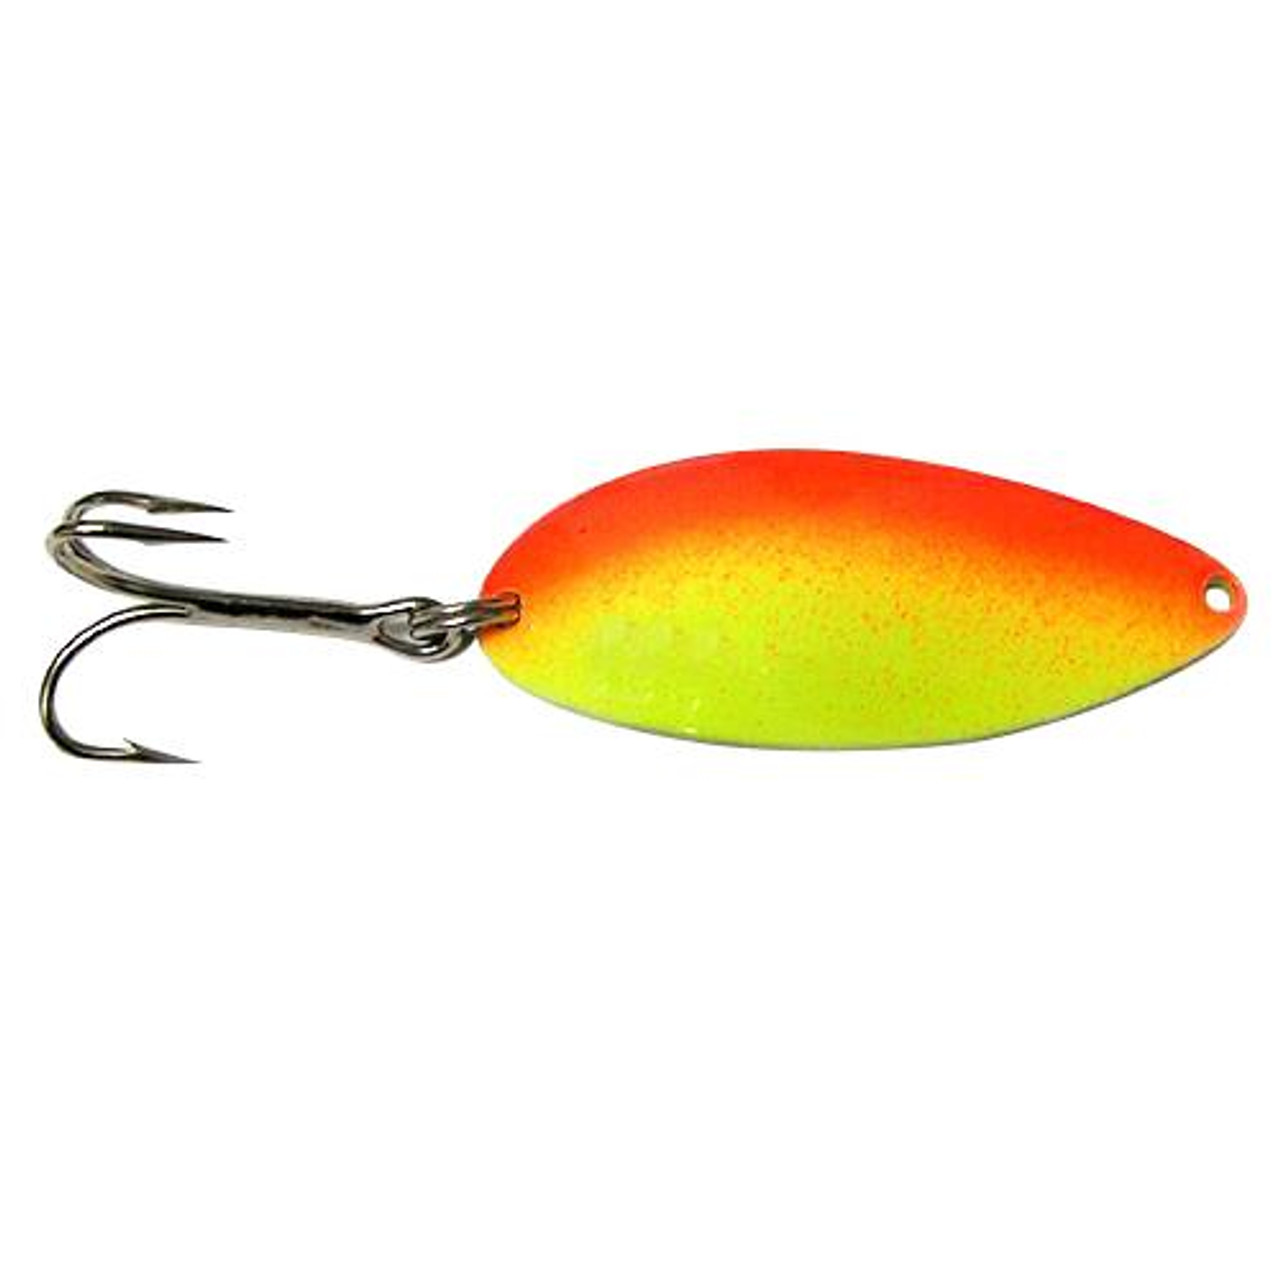 ACME Tackle Little Cleo Spoon